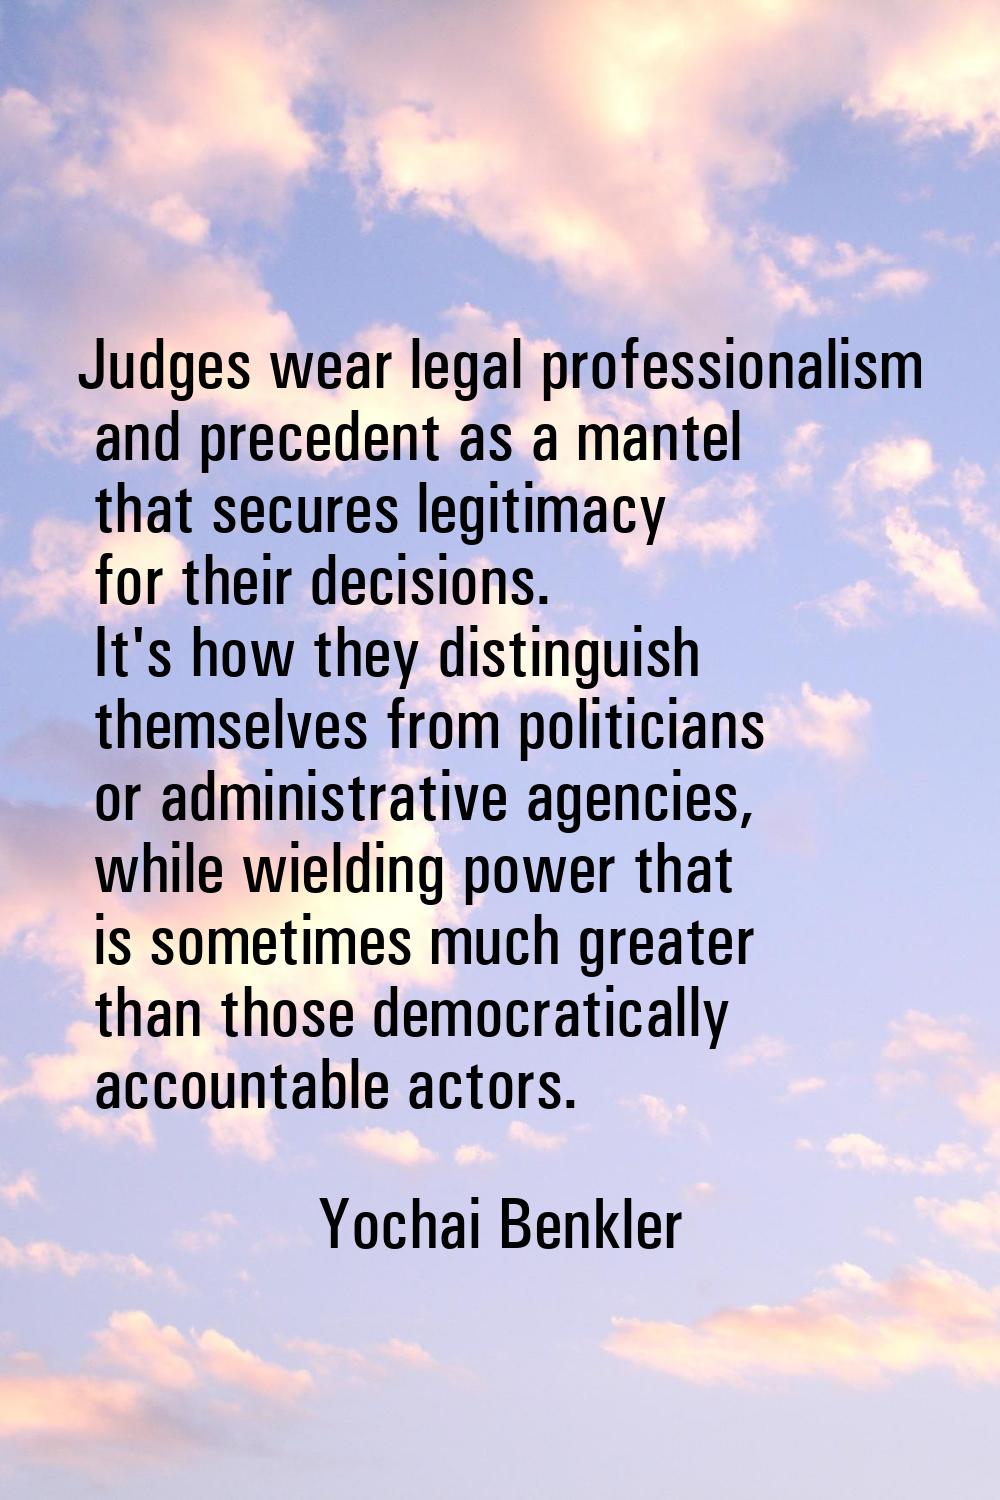 Judges wear legal professionalism and precedent as a mantel that secures legitimacy for their decis